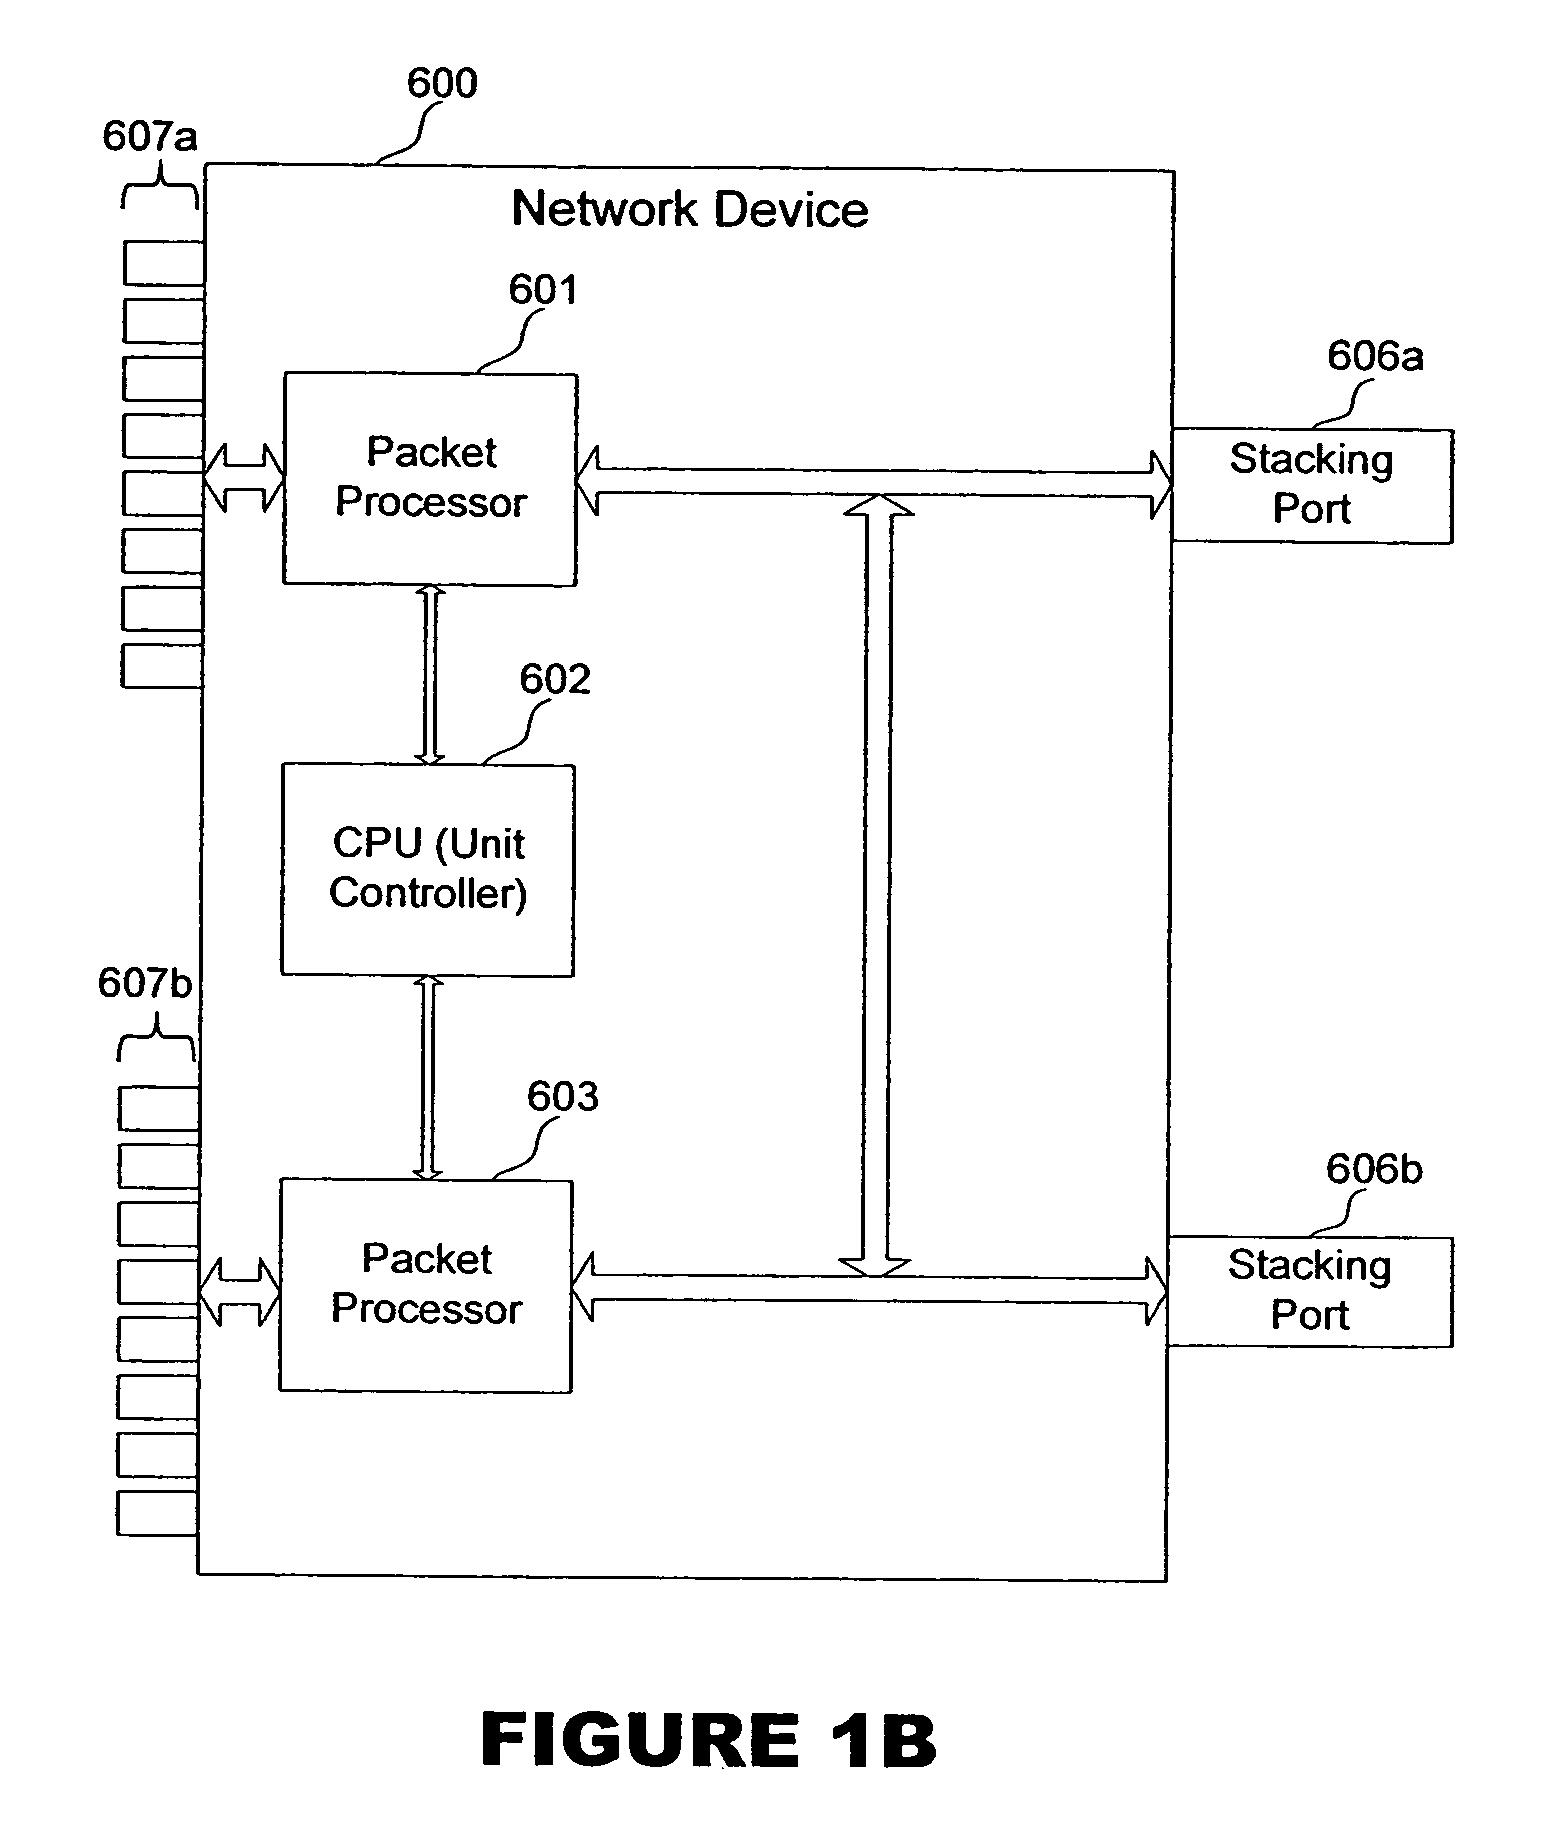 Apparatus and method for master election and topology discovery in an Ethernet network